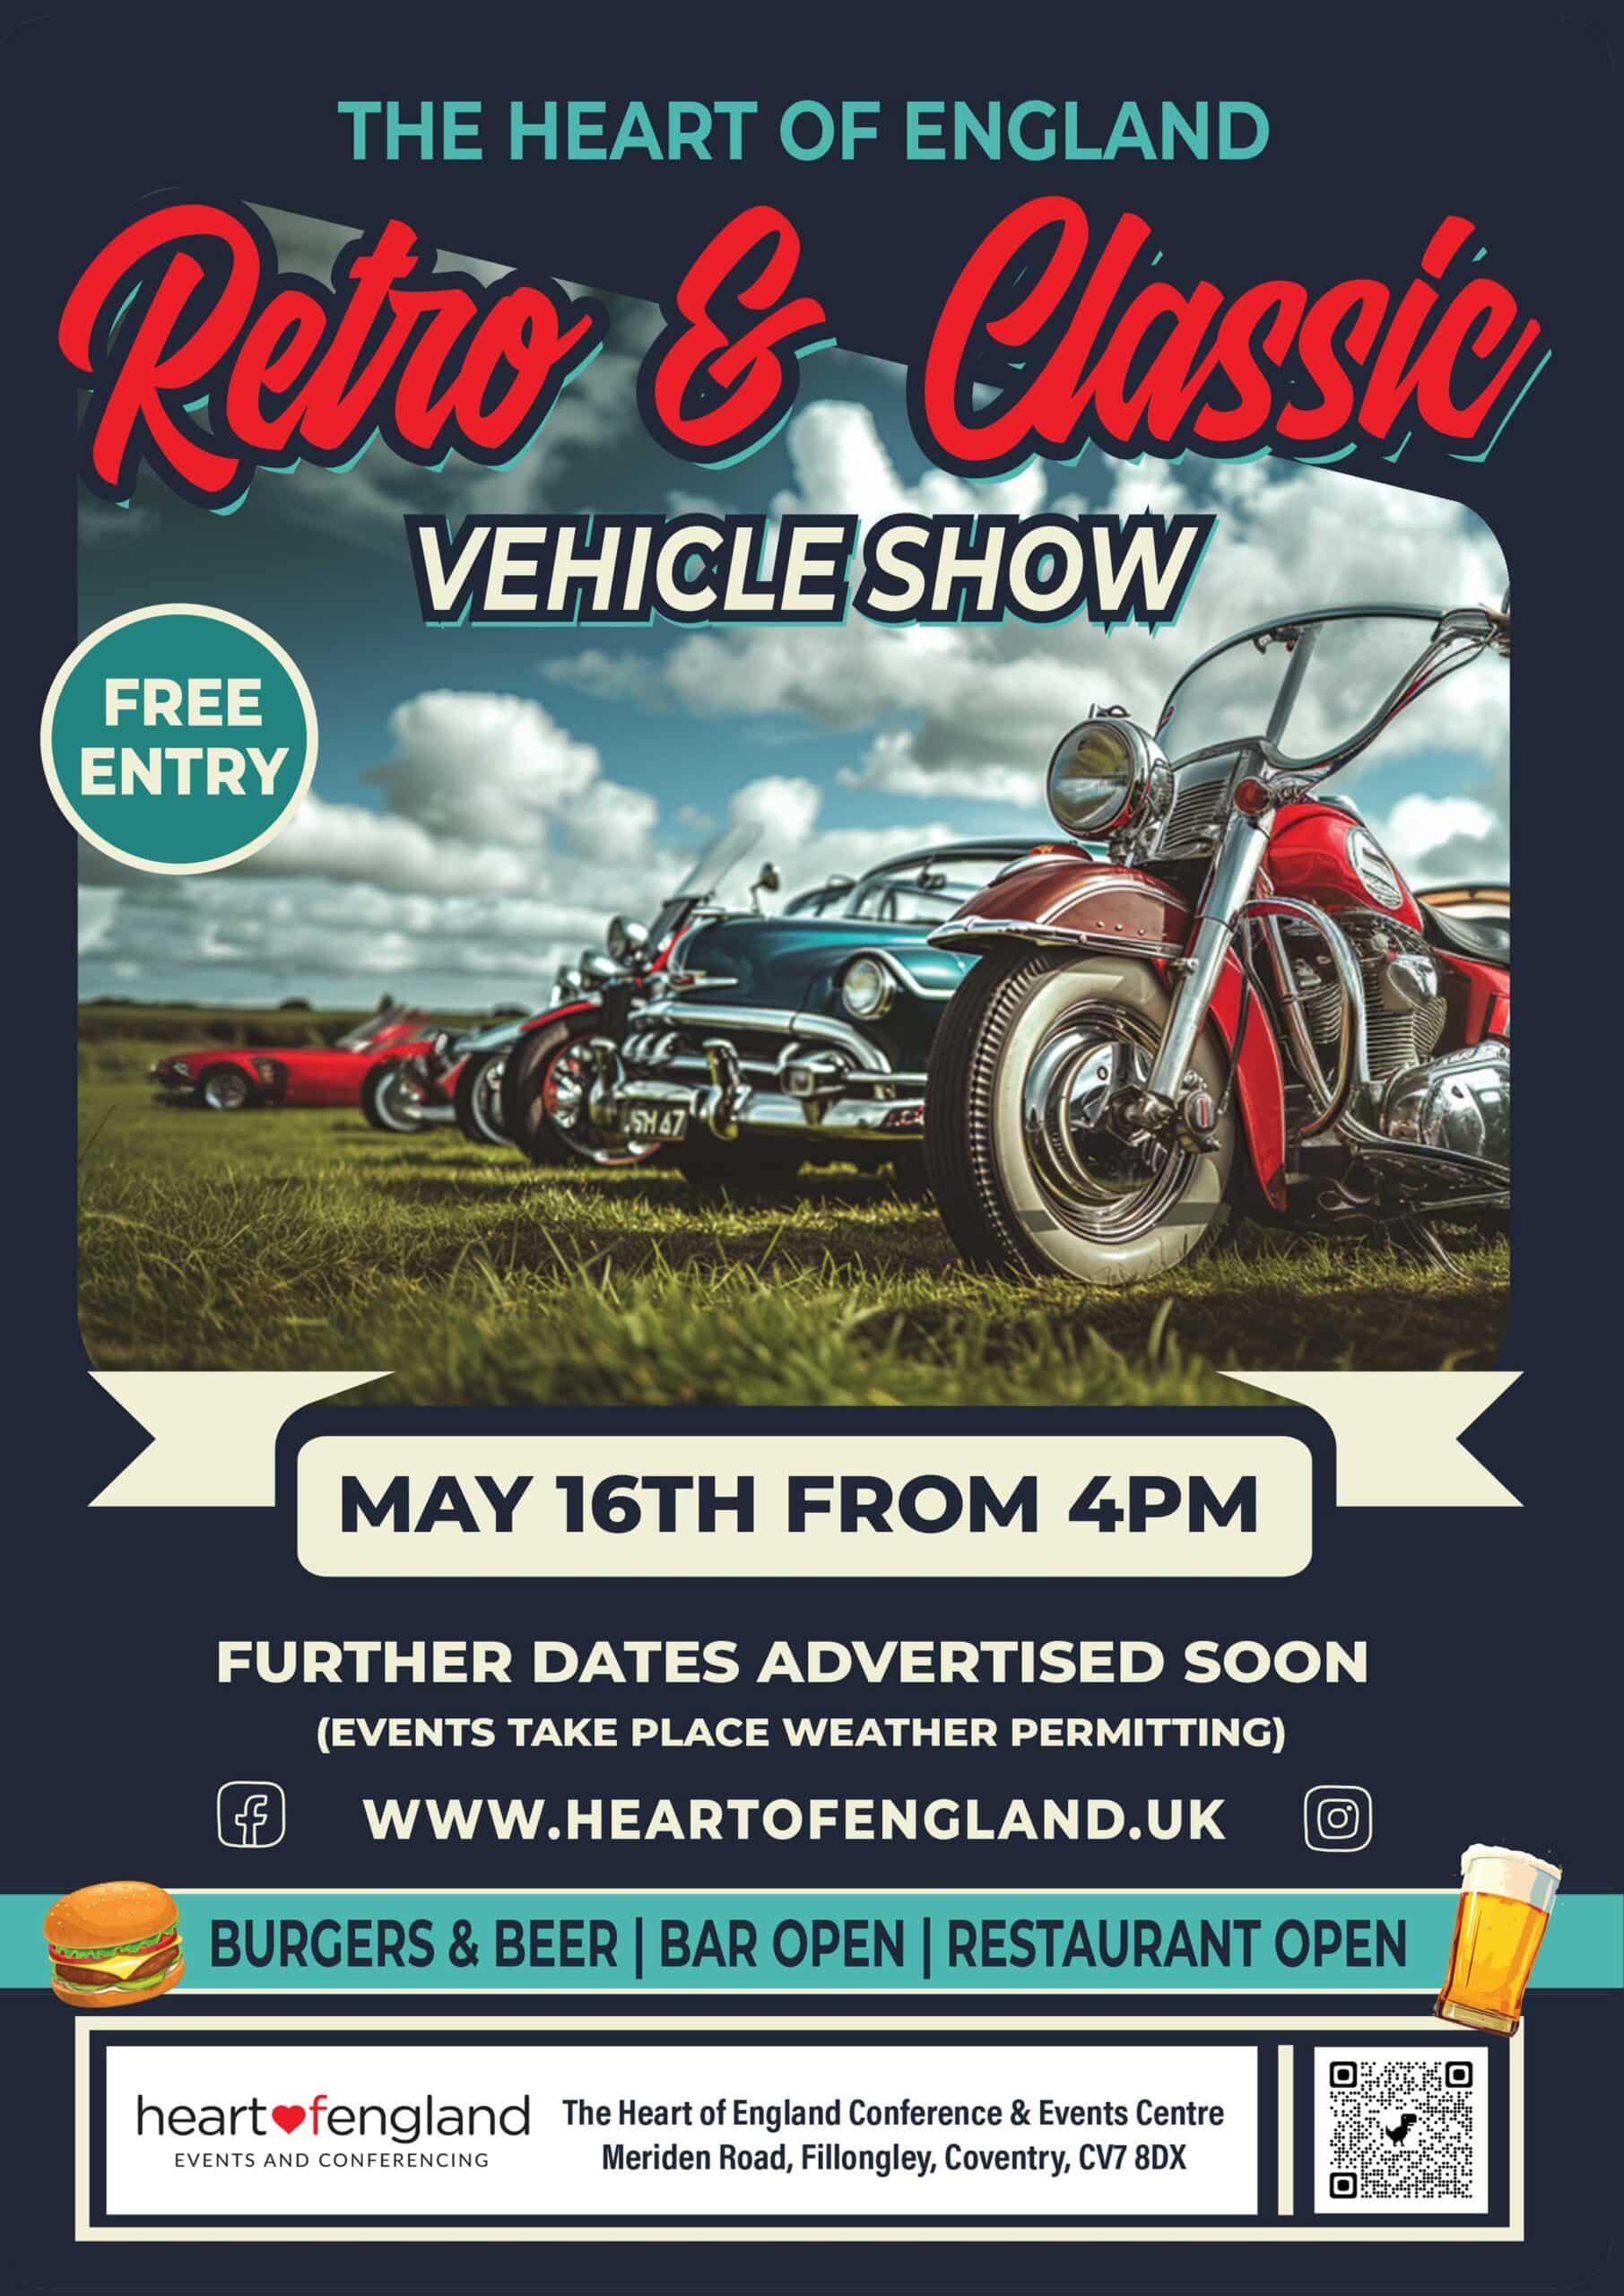 The Heart of England Retro and Classic Vehicle Show